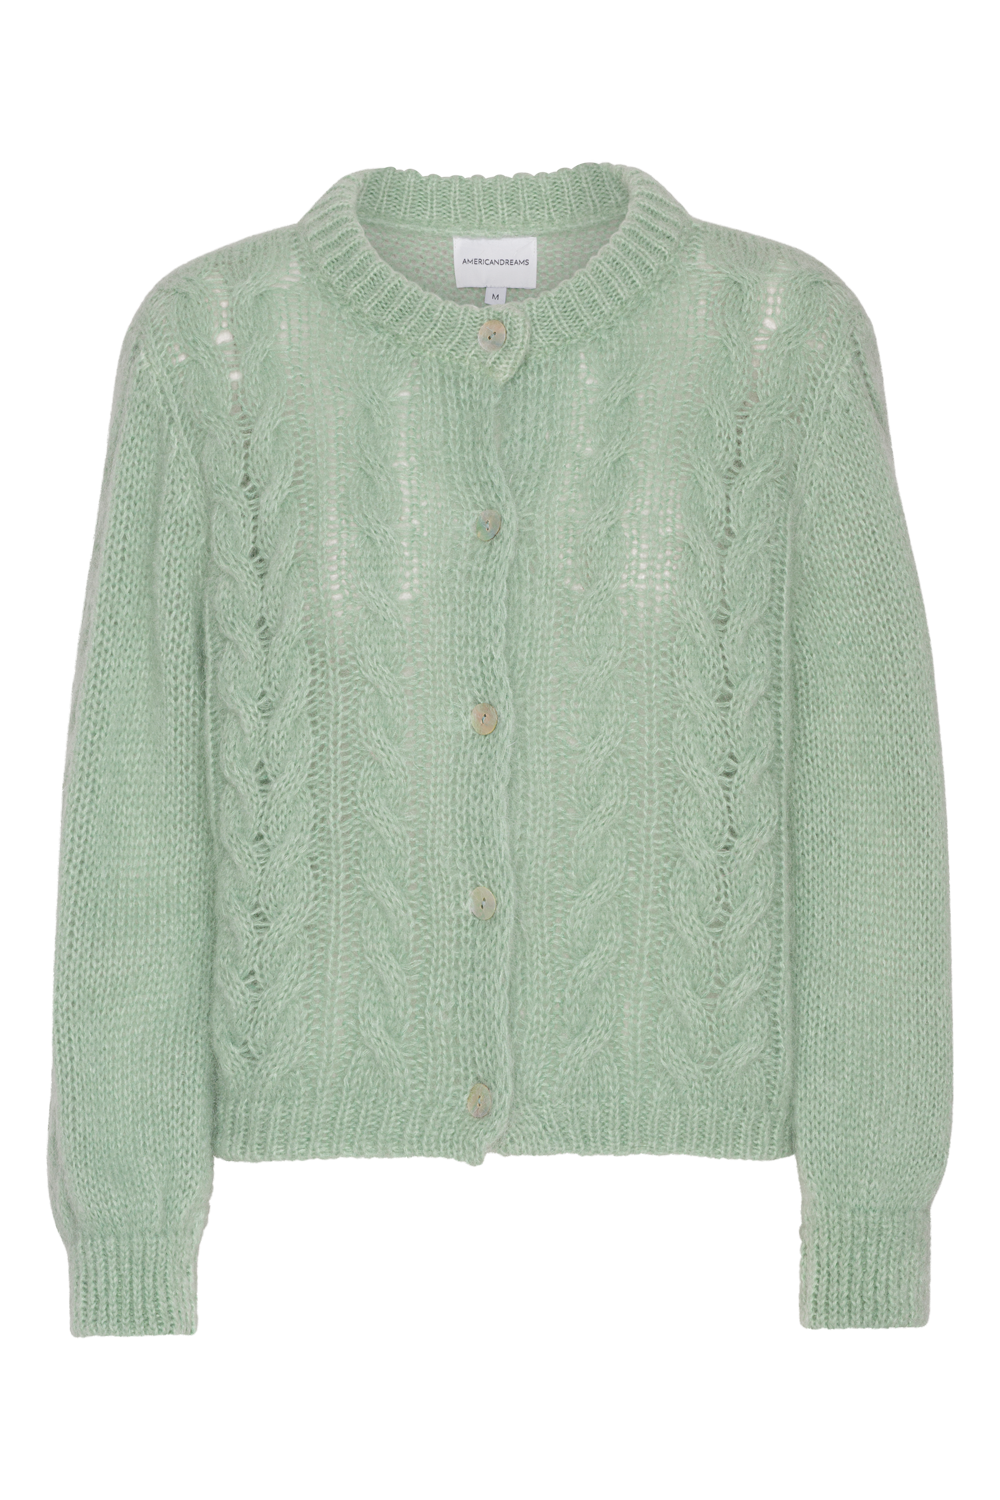 Frankie Cable Knit Cardigan Mint Green